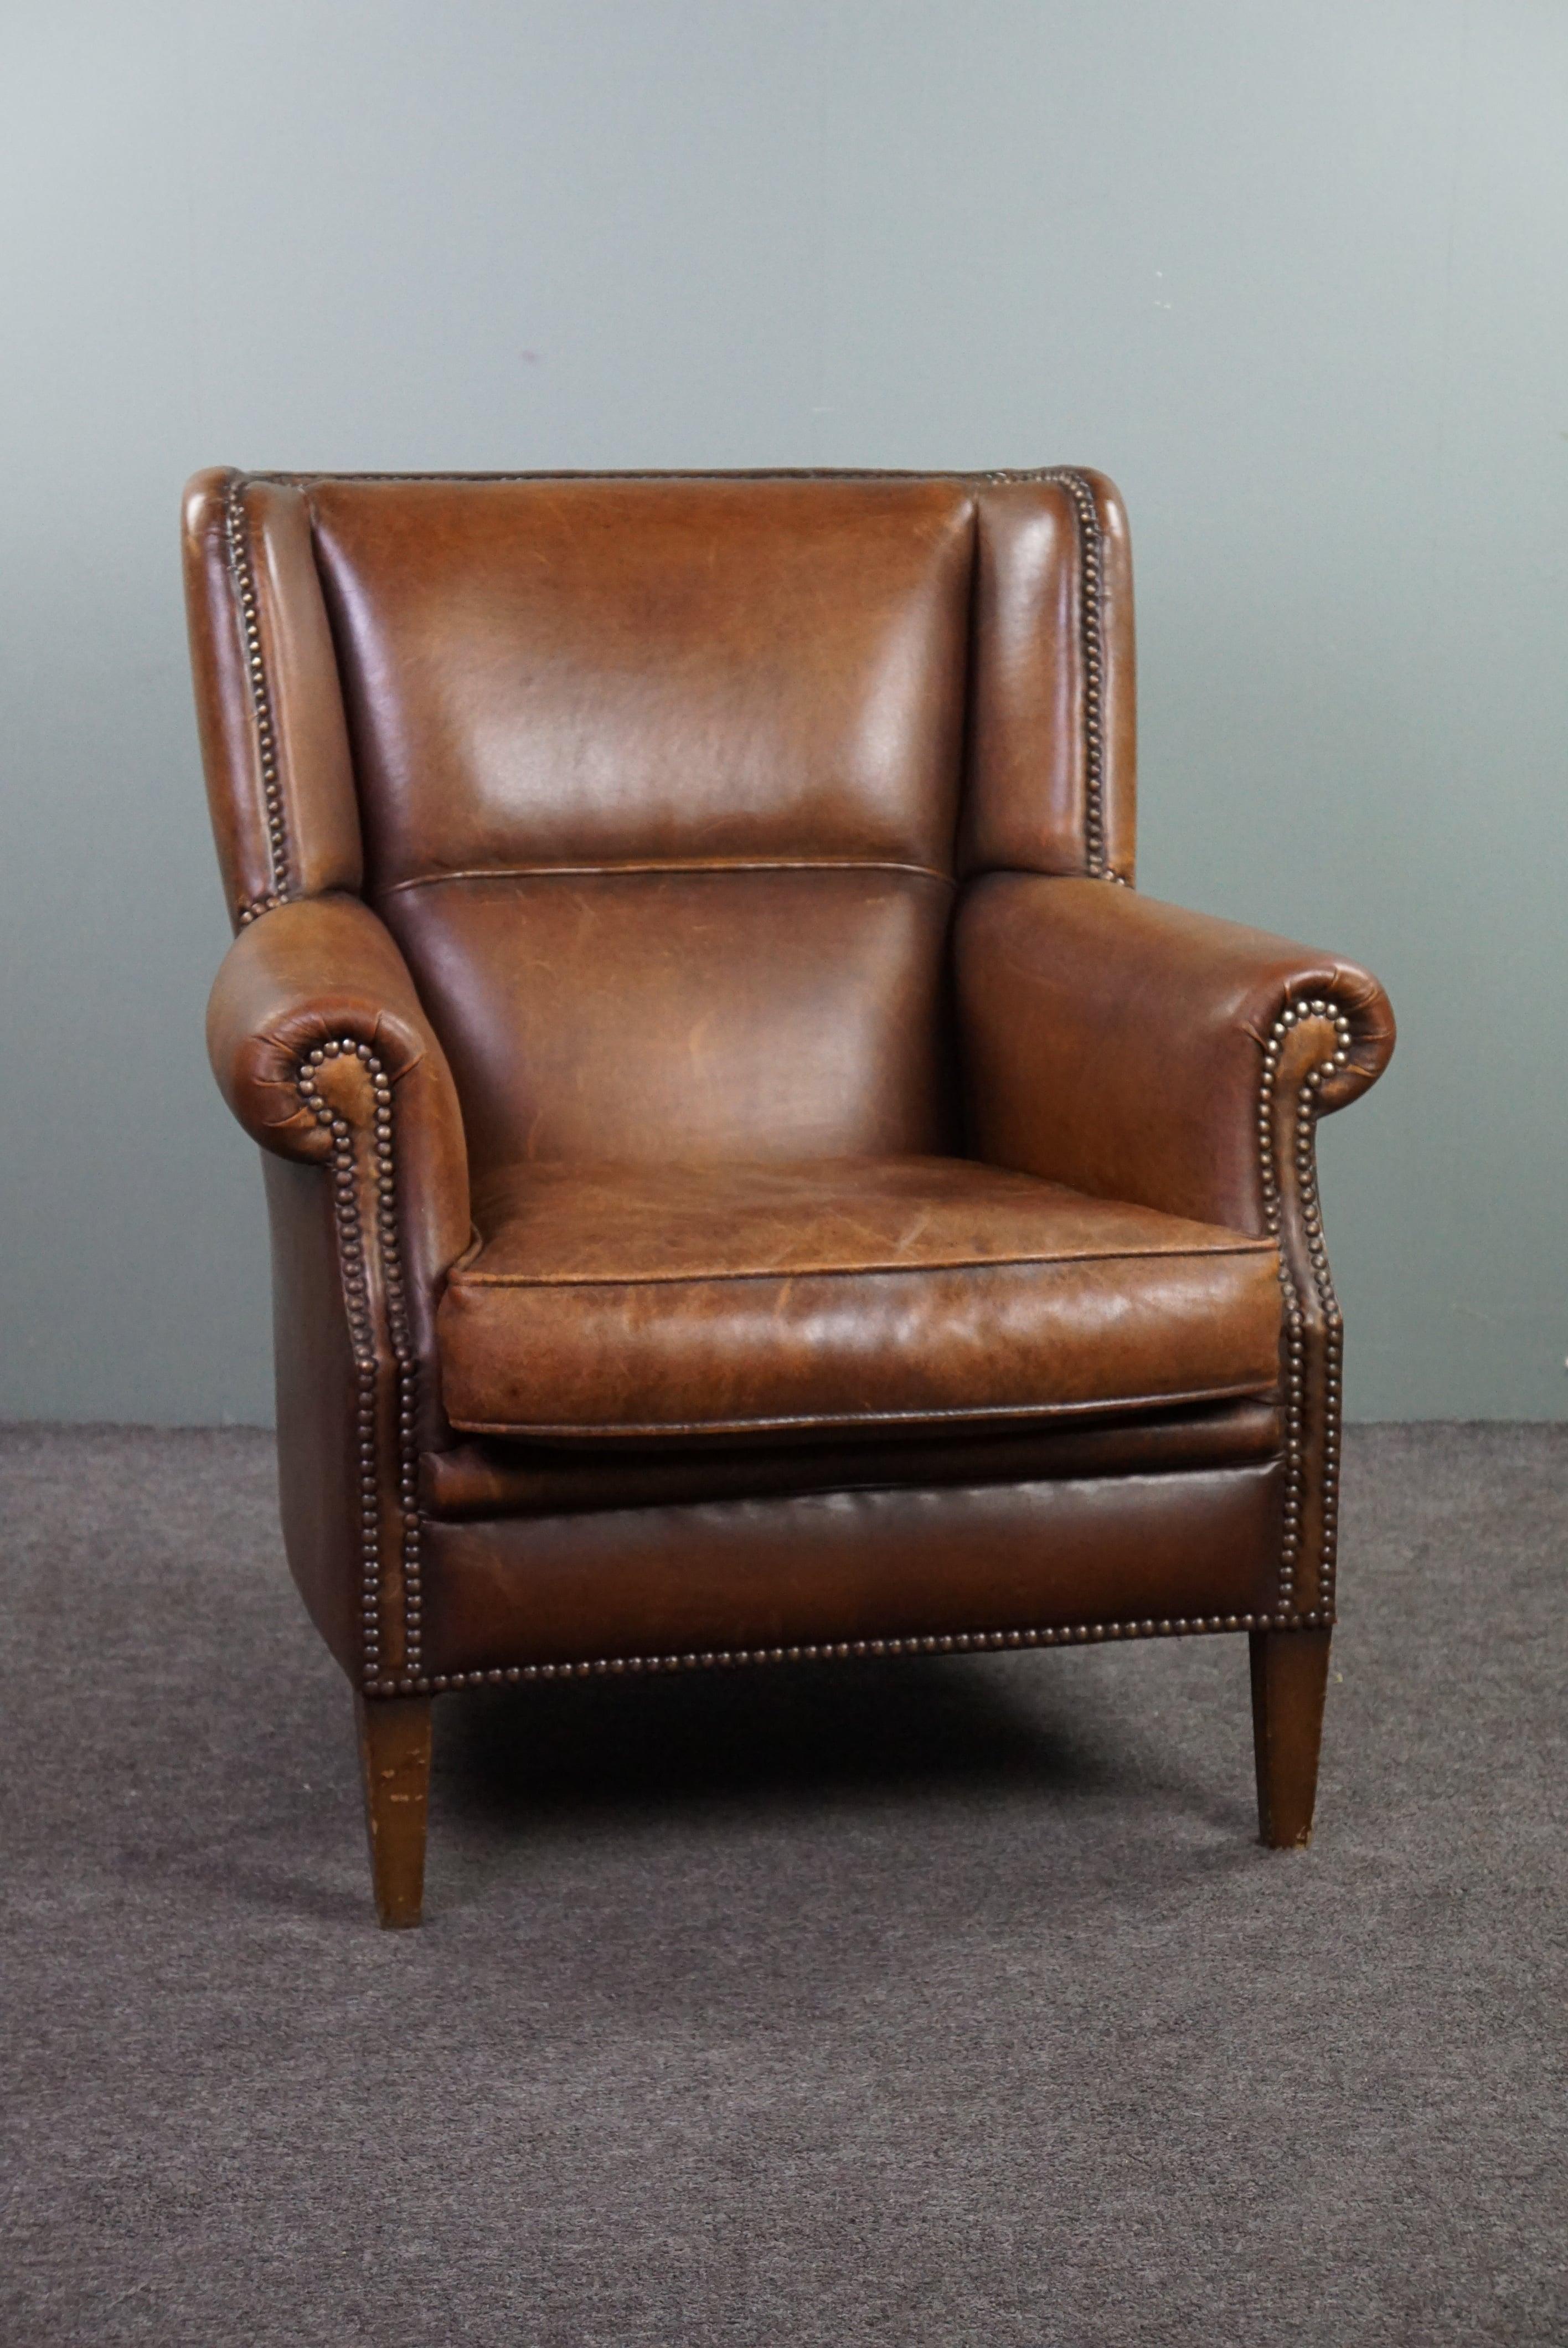 With pride we offer you this beautiful sheep leather wingchair in a stunning color scheme!

This wingchair with a distinctive appearance features a beautiful variety of colors in the sheep leather. Through use, this chair has acquired a lovely